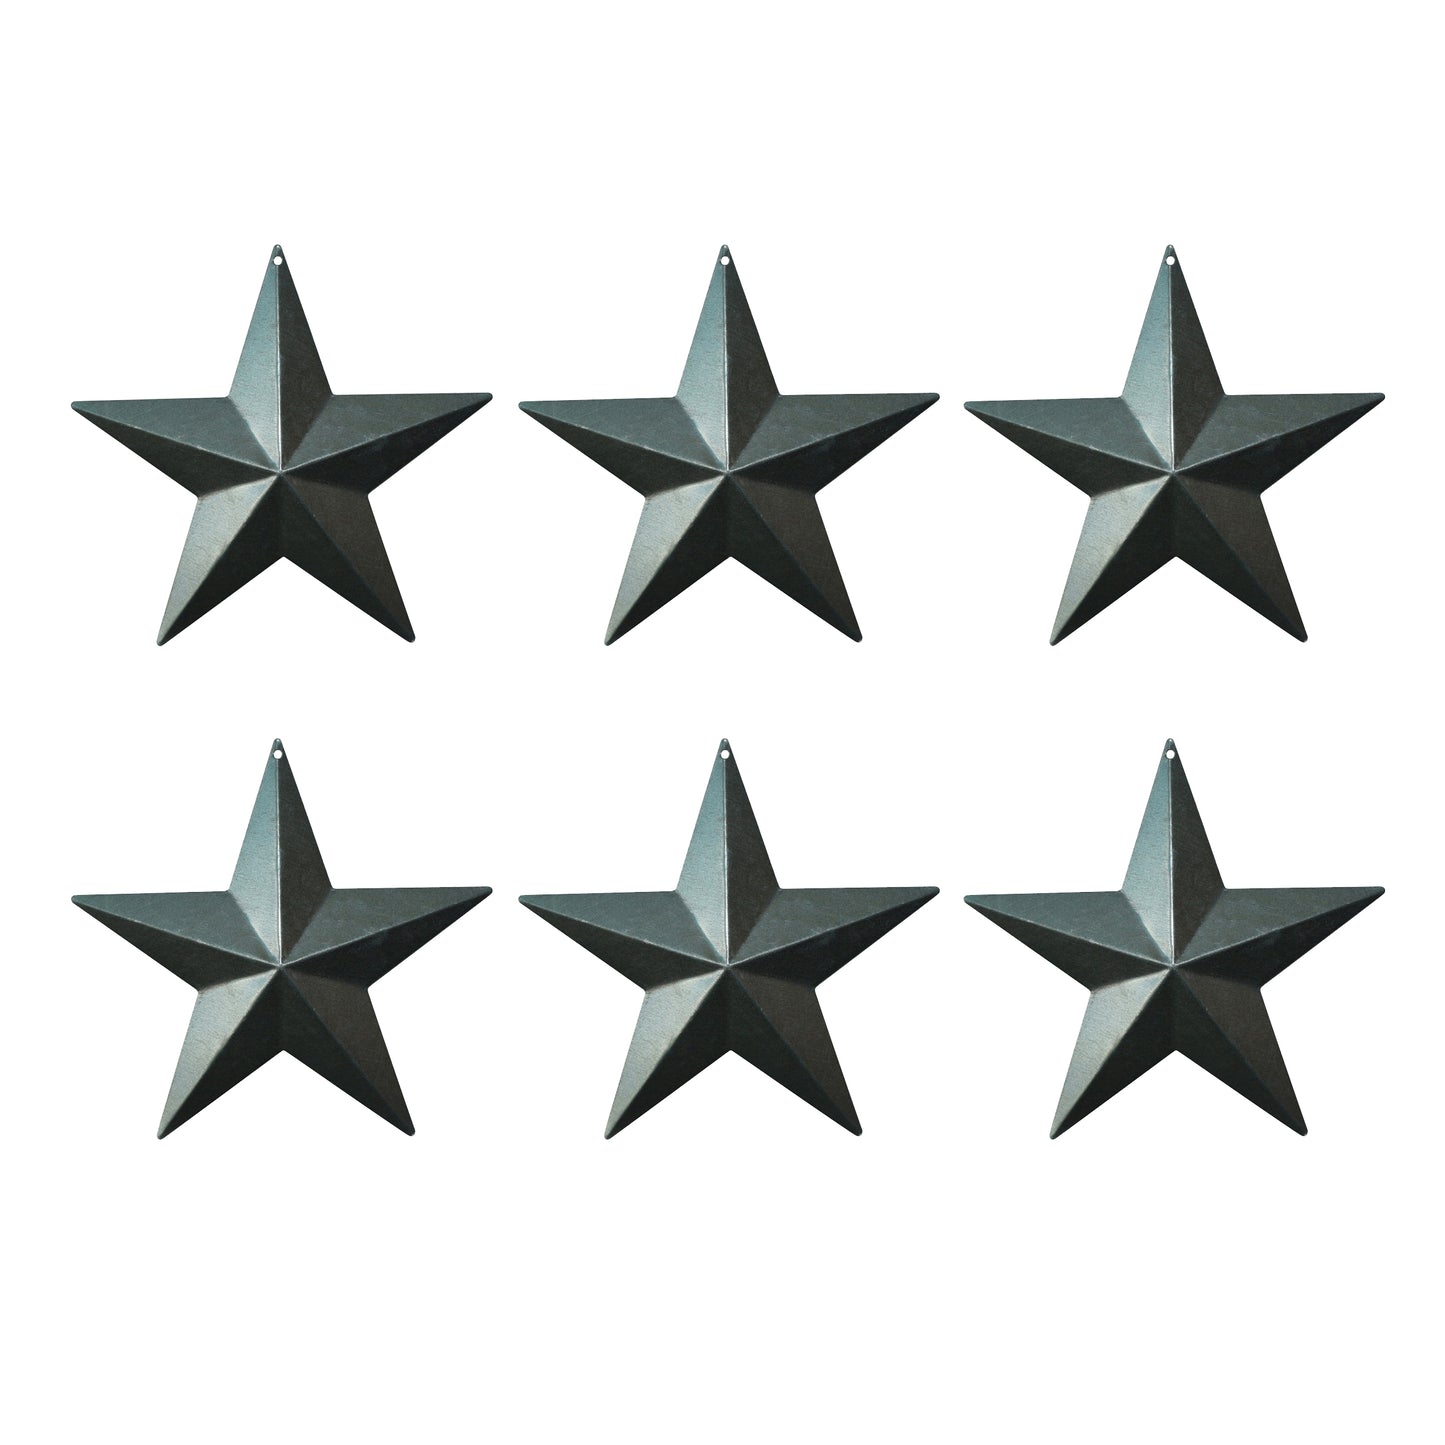 CVHOMEDECO. Country Rustic Antique Vintage Gifts Grungy Desert Sage Metal Barn Star Wall/Door Decor, 4 Inch, Set of 6.